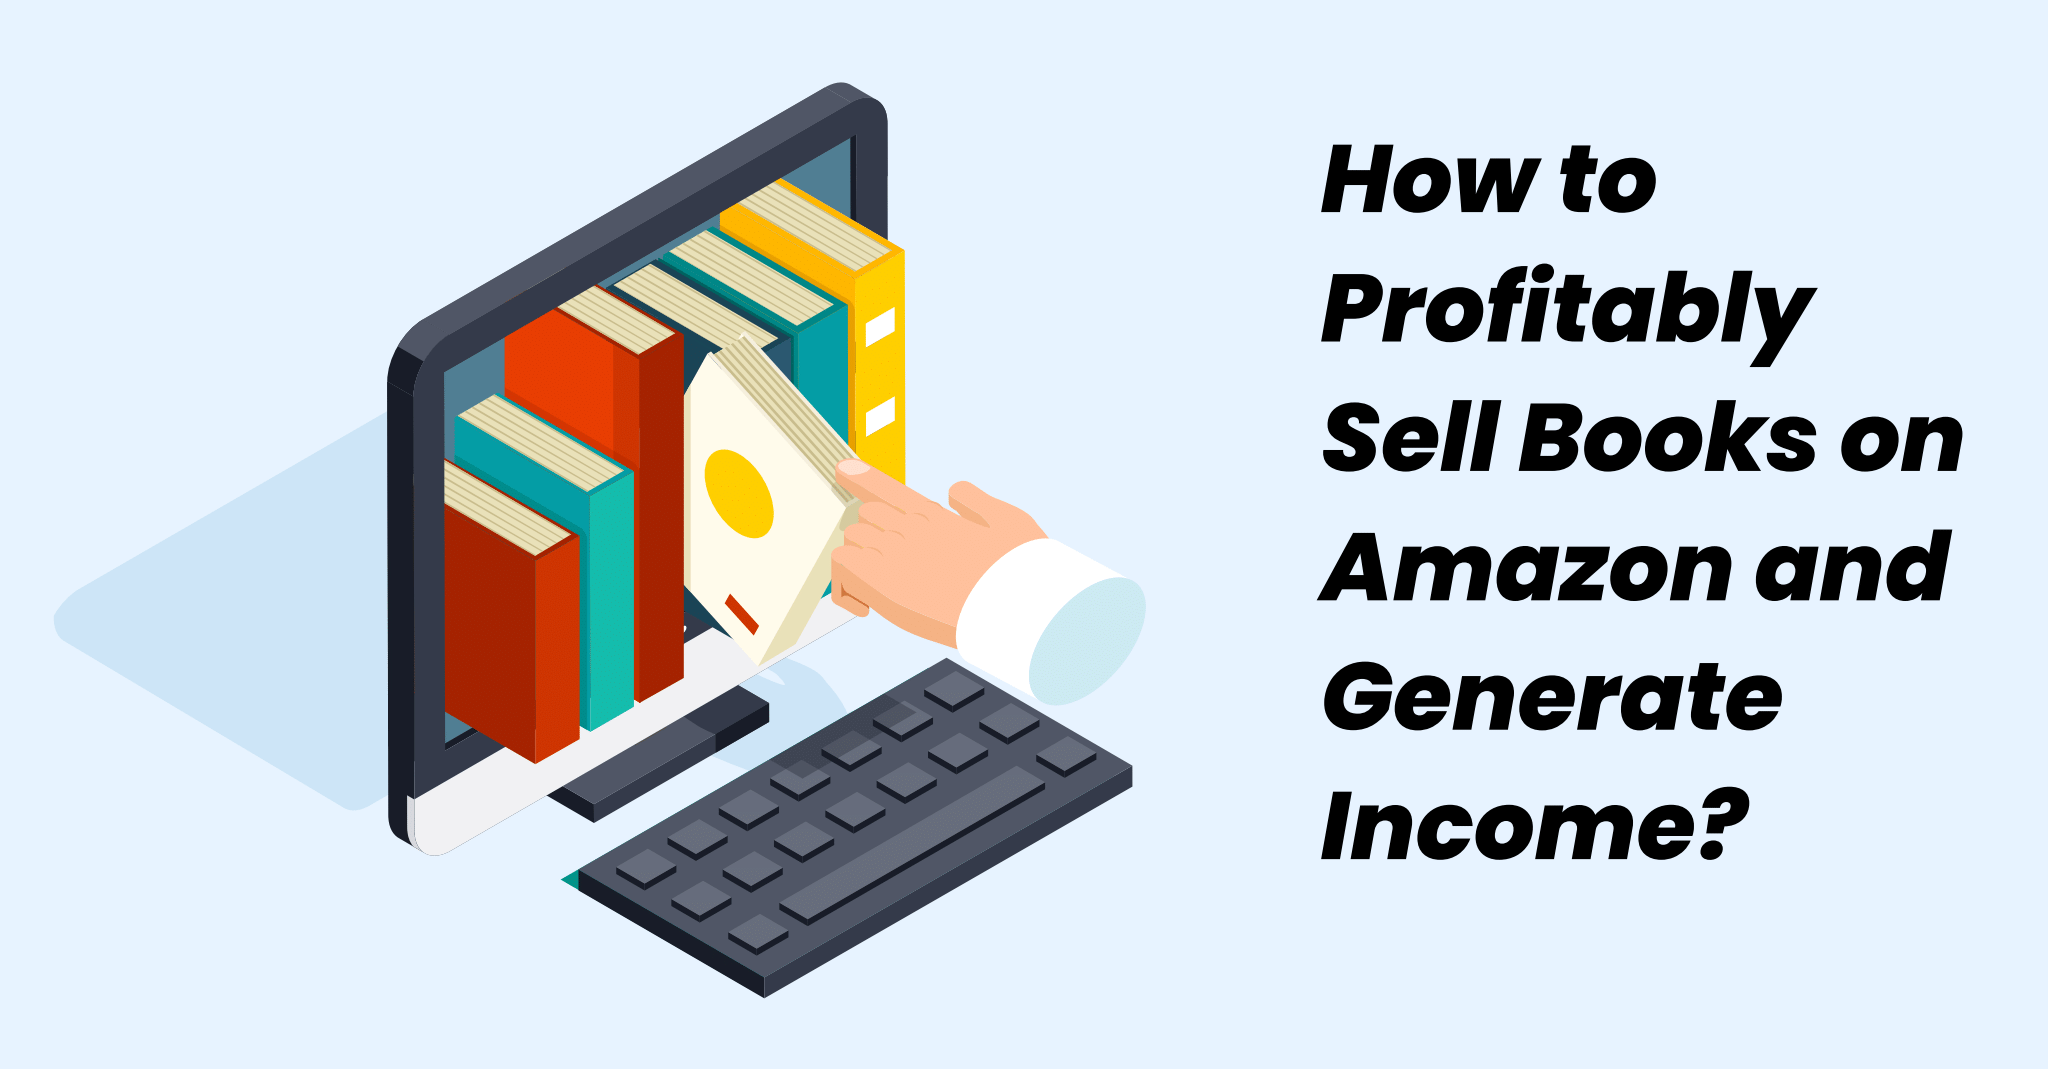 How to Profitably Sell Books on Amazon and Generate Income?